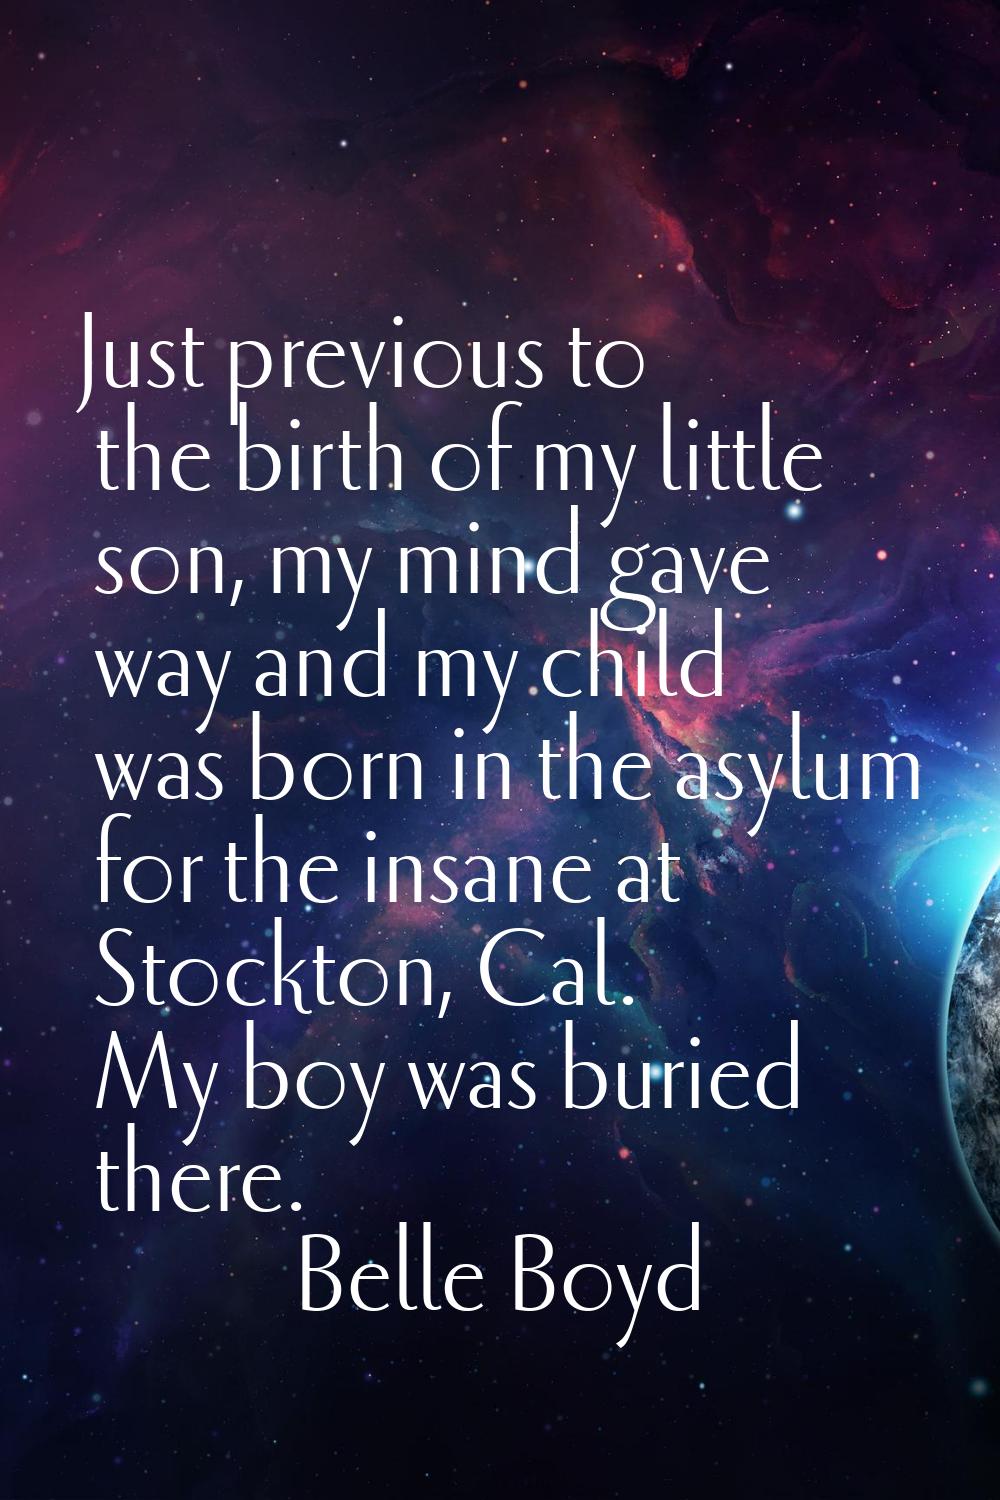 Just previous to the birth of my little son, my mind gave way and my child was born in the asylum f